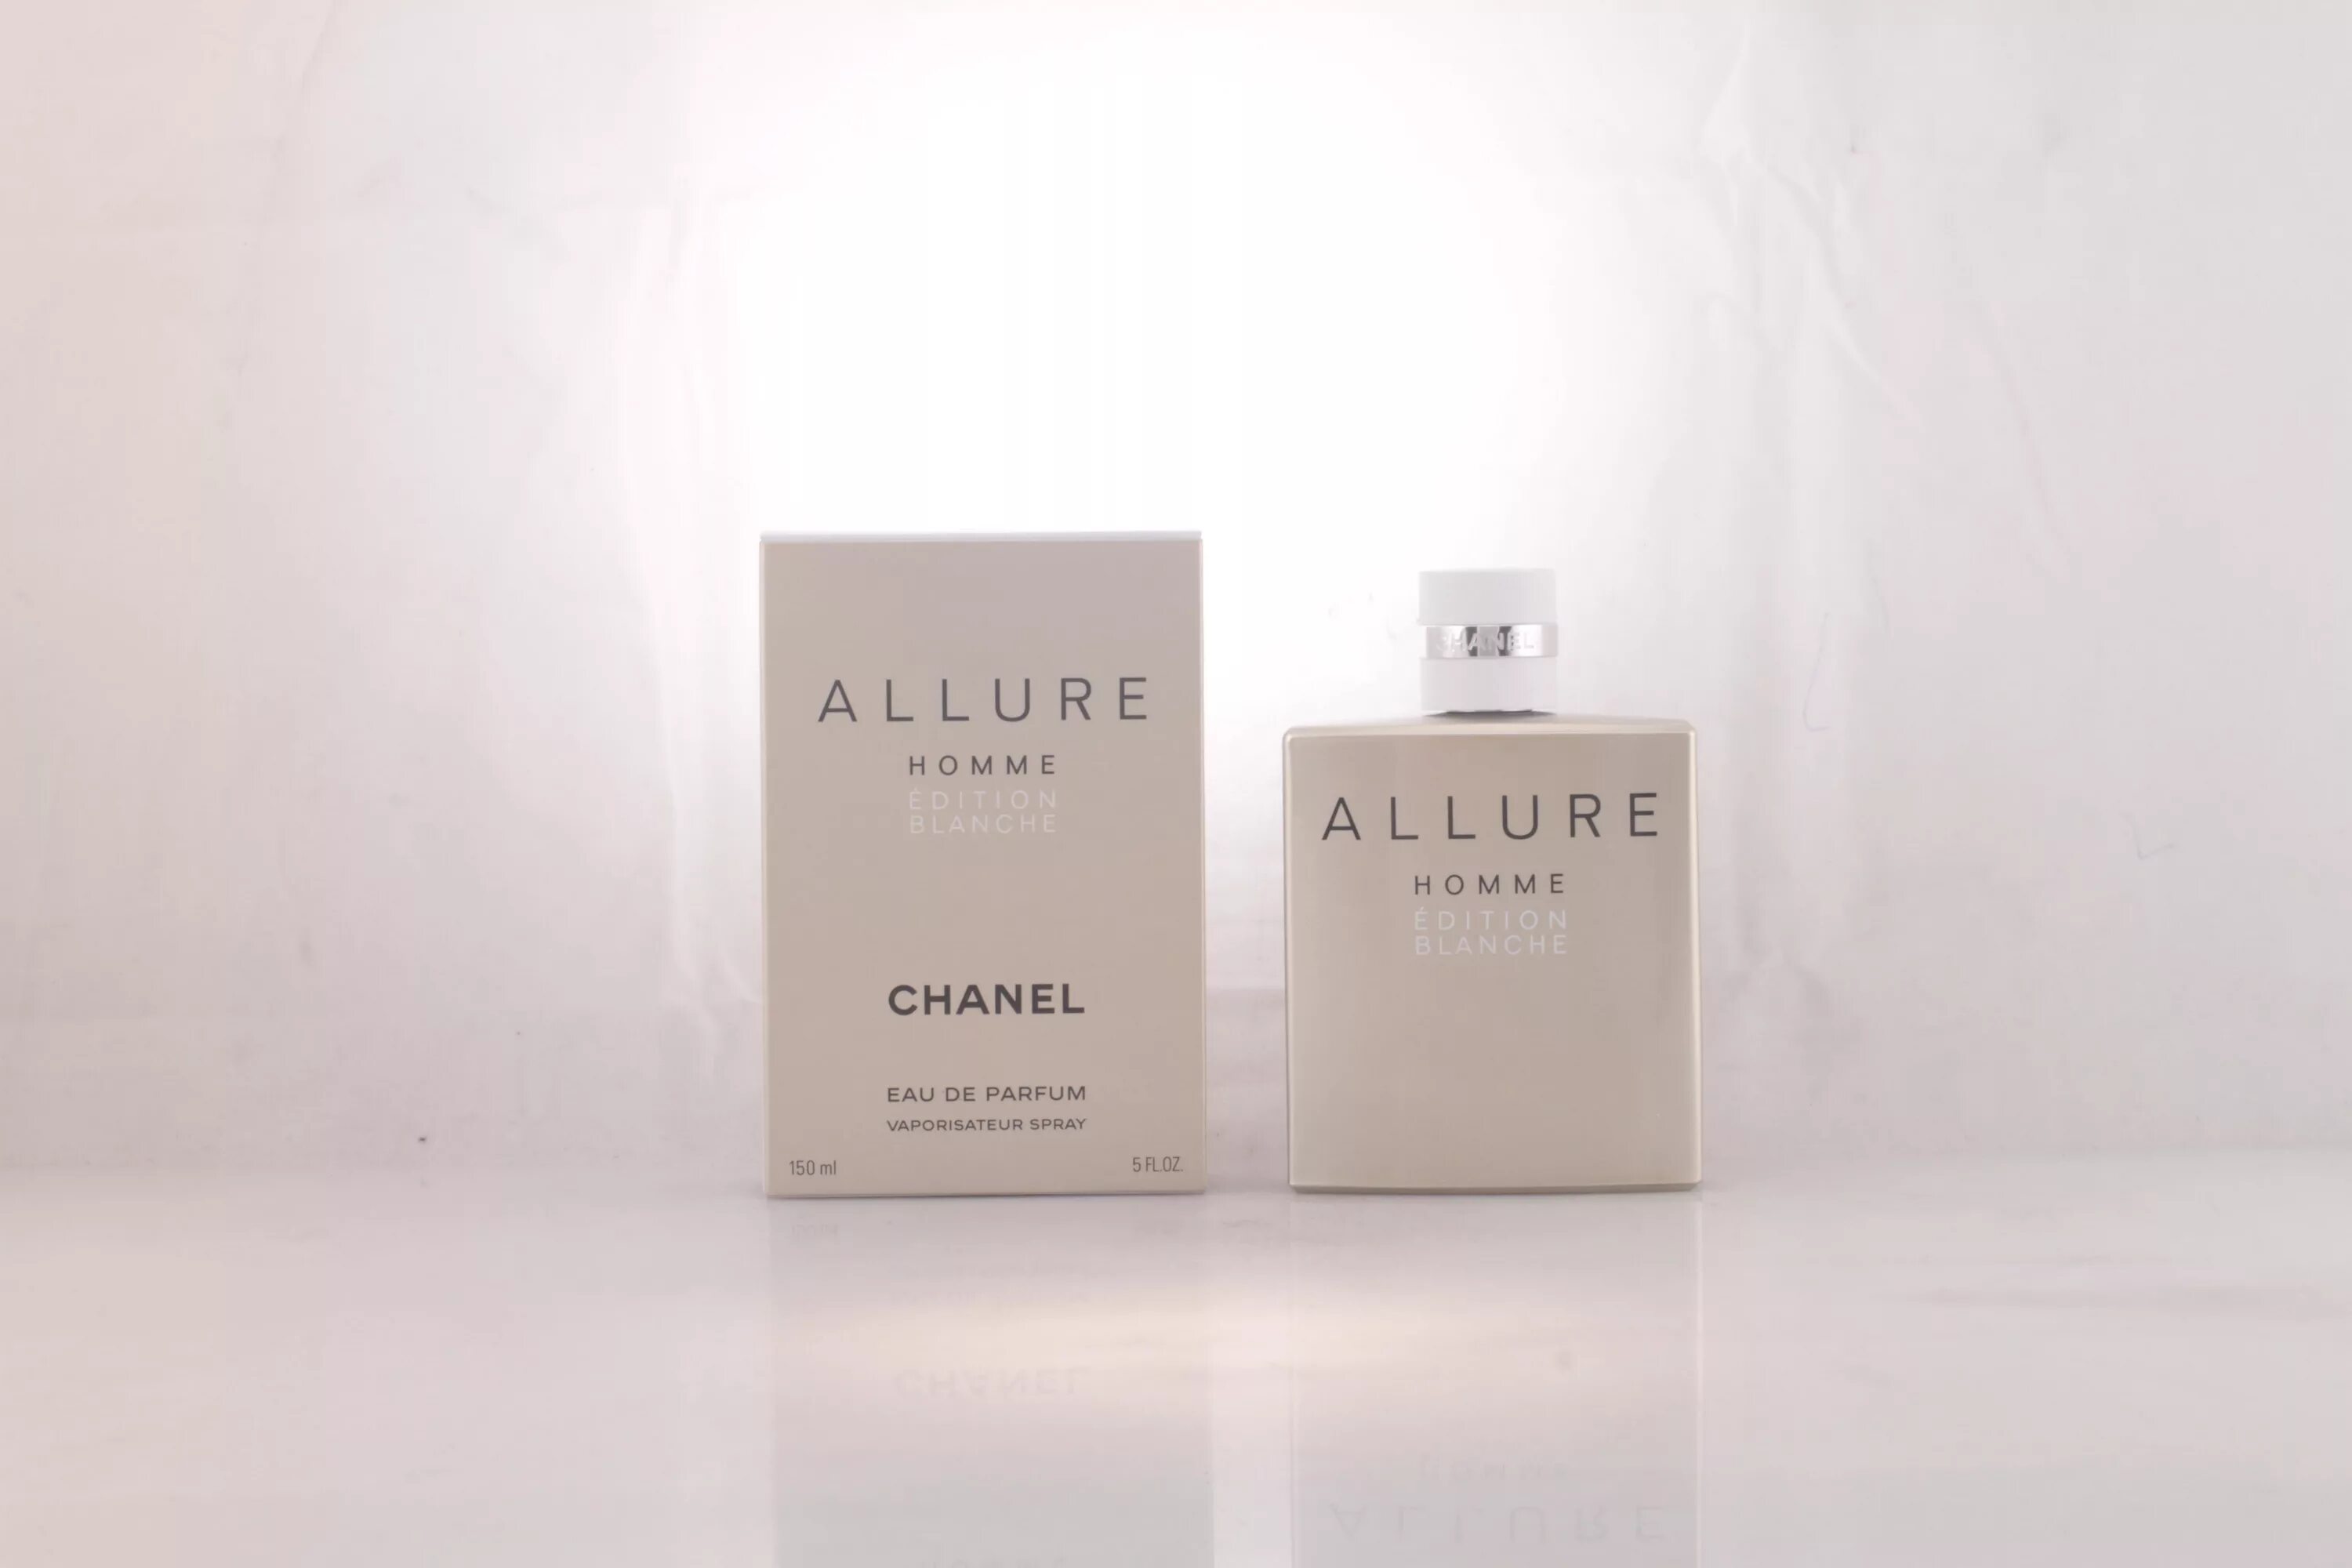 Chanel allure homme blanche. Chanel Allure homme Edition Blanche. Chanel Allure homme Edition Blanche Eau de Parfum. Allure homme Blanche Edition 150 мл. Парфюм Allure homme Edition Blanche Chanel.